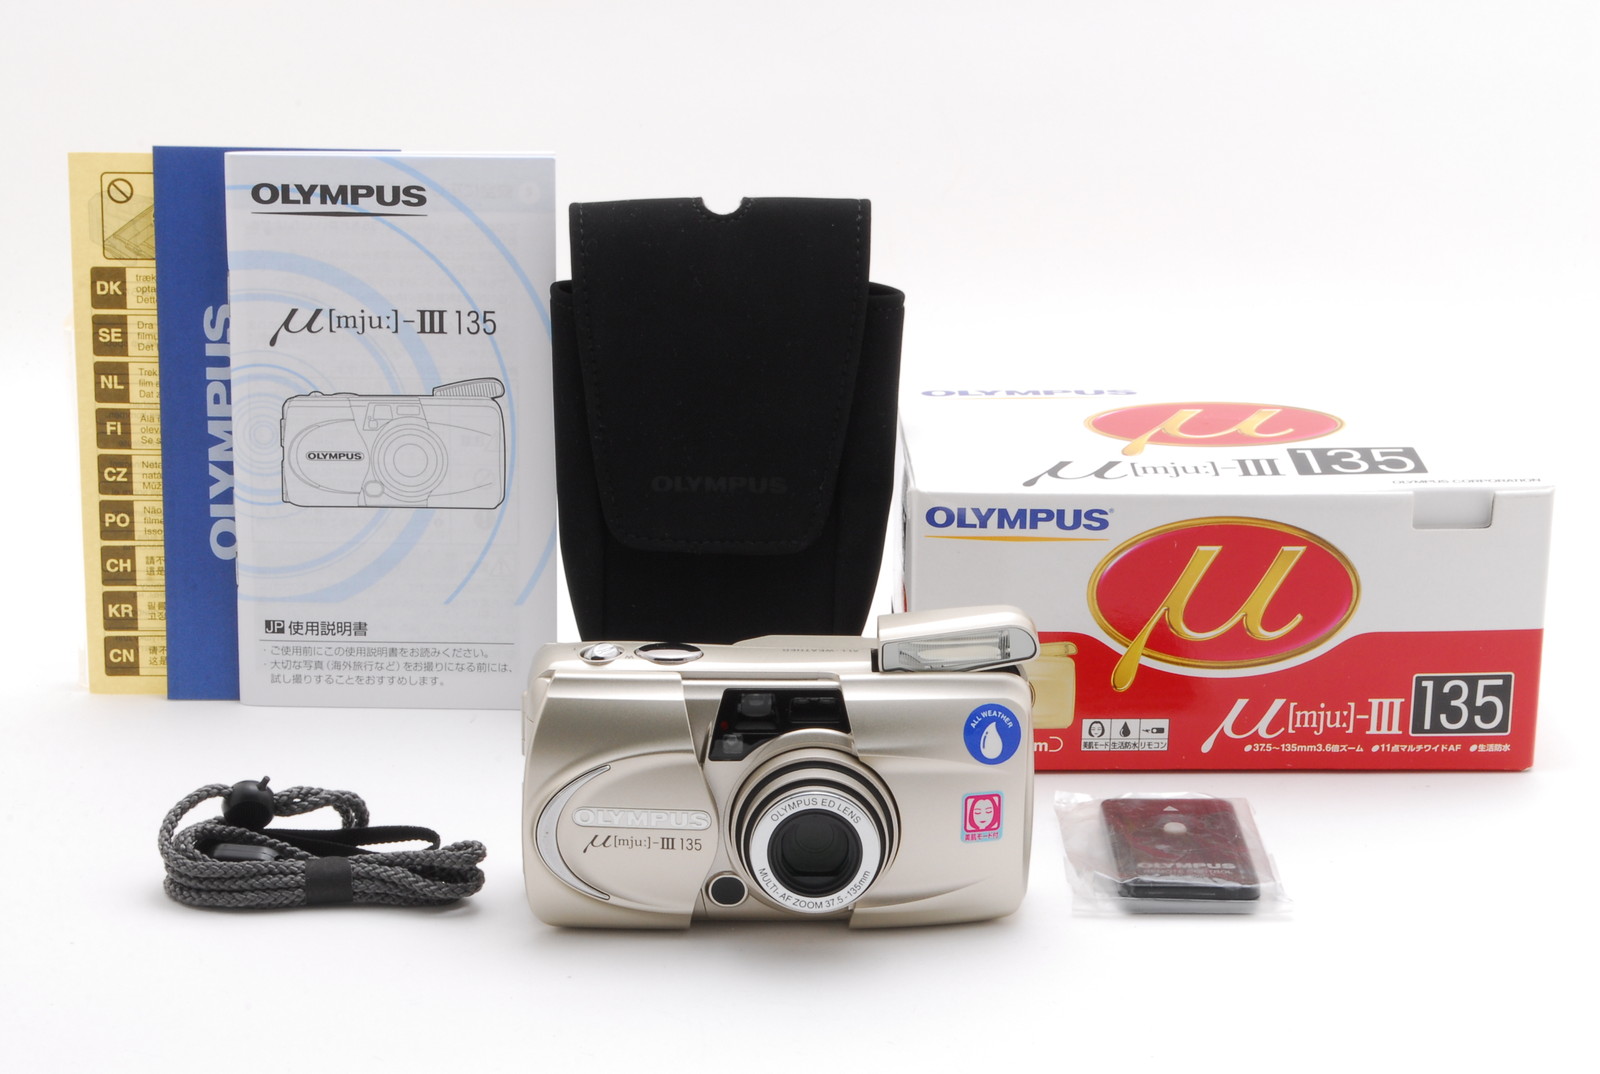 PROMOTION.ALMOST UNUSED Olympus Mju-III 135, Box, Manual, RC-300C, Strap, Case from Japan